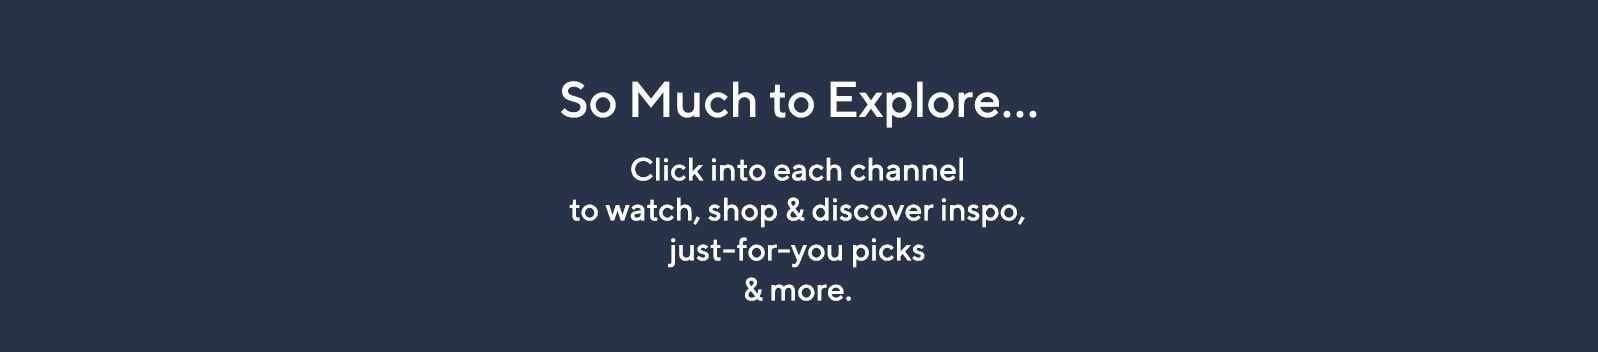 So Much to Explore… Click into each channel to watch, shop & discover inspo, just-for-you picks & more.